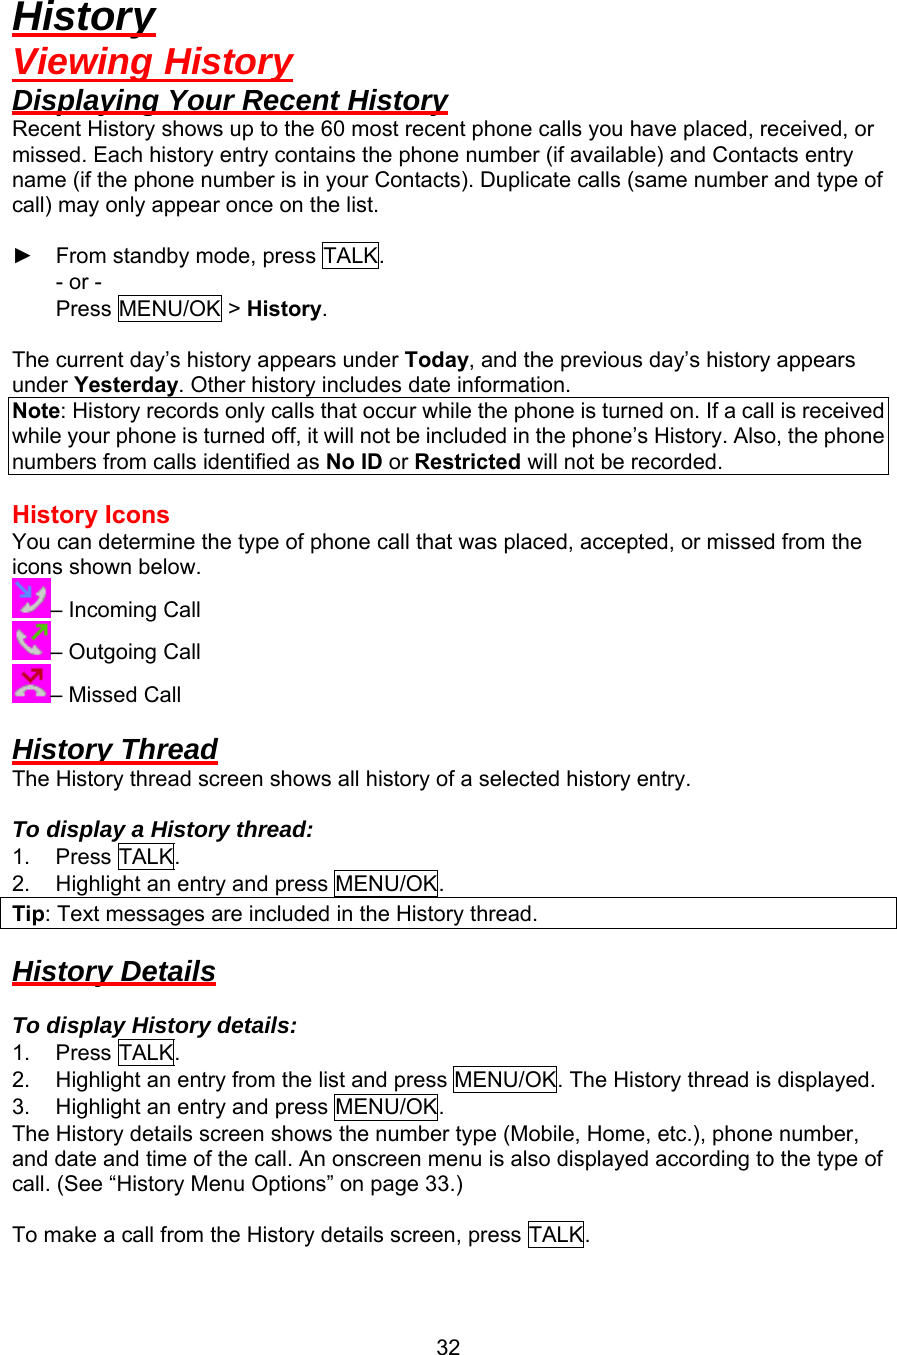 History Viewing History Displaying Your Recent History Recent History shows up to the 60 most recent phone calls you have placed, received, or missed. Each history entry contains the phone number (if available) and Contacts entry name (if the phone number is in your Contacts). Duplicate calls (same number and type of call) may only appear once on the list.  ► From standby mode, press TALK. - or - Press MENU/OK &gt; History.  The current day’s history appears under Today, and the previous day’s history appears under Yesterday. Other history includes date information. Note: History records only calls that occur while the phone is turned on. If a call is received while your phone is turned off, it will not be included in the phone’s History. Also, the phone numbers from calls identified as No ID or Restricted will not be recorded.  History Icons You can determine the type of phone call that was placed, accepted, or missed from the icons shown below. – Incoming Call – Outgoing Call – Missed Call  History Thread The History thread screen shows all history of a selected history entry.  To display a History thread: 1. Press TALK. 2.  Highlight an entry and press MENU/OK. Tip: Text messages are included in the History thread.  History Details  To display History details: 1. Press TALK. 2.  Highlight an entry from the list and press MENU/OK. The History thread is displayed. 3.  Highlight an entry and press MENU/OK. The History details screen shows the number type (Mobile, Home, etc.), phone number, and date and time of the call. An onscreen menu is also displayed according to the type of call. (See “History Menu Options” on page 33.)  To make a call from the History details screen, press TALK.  32